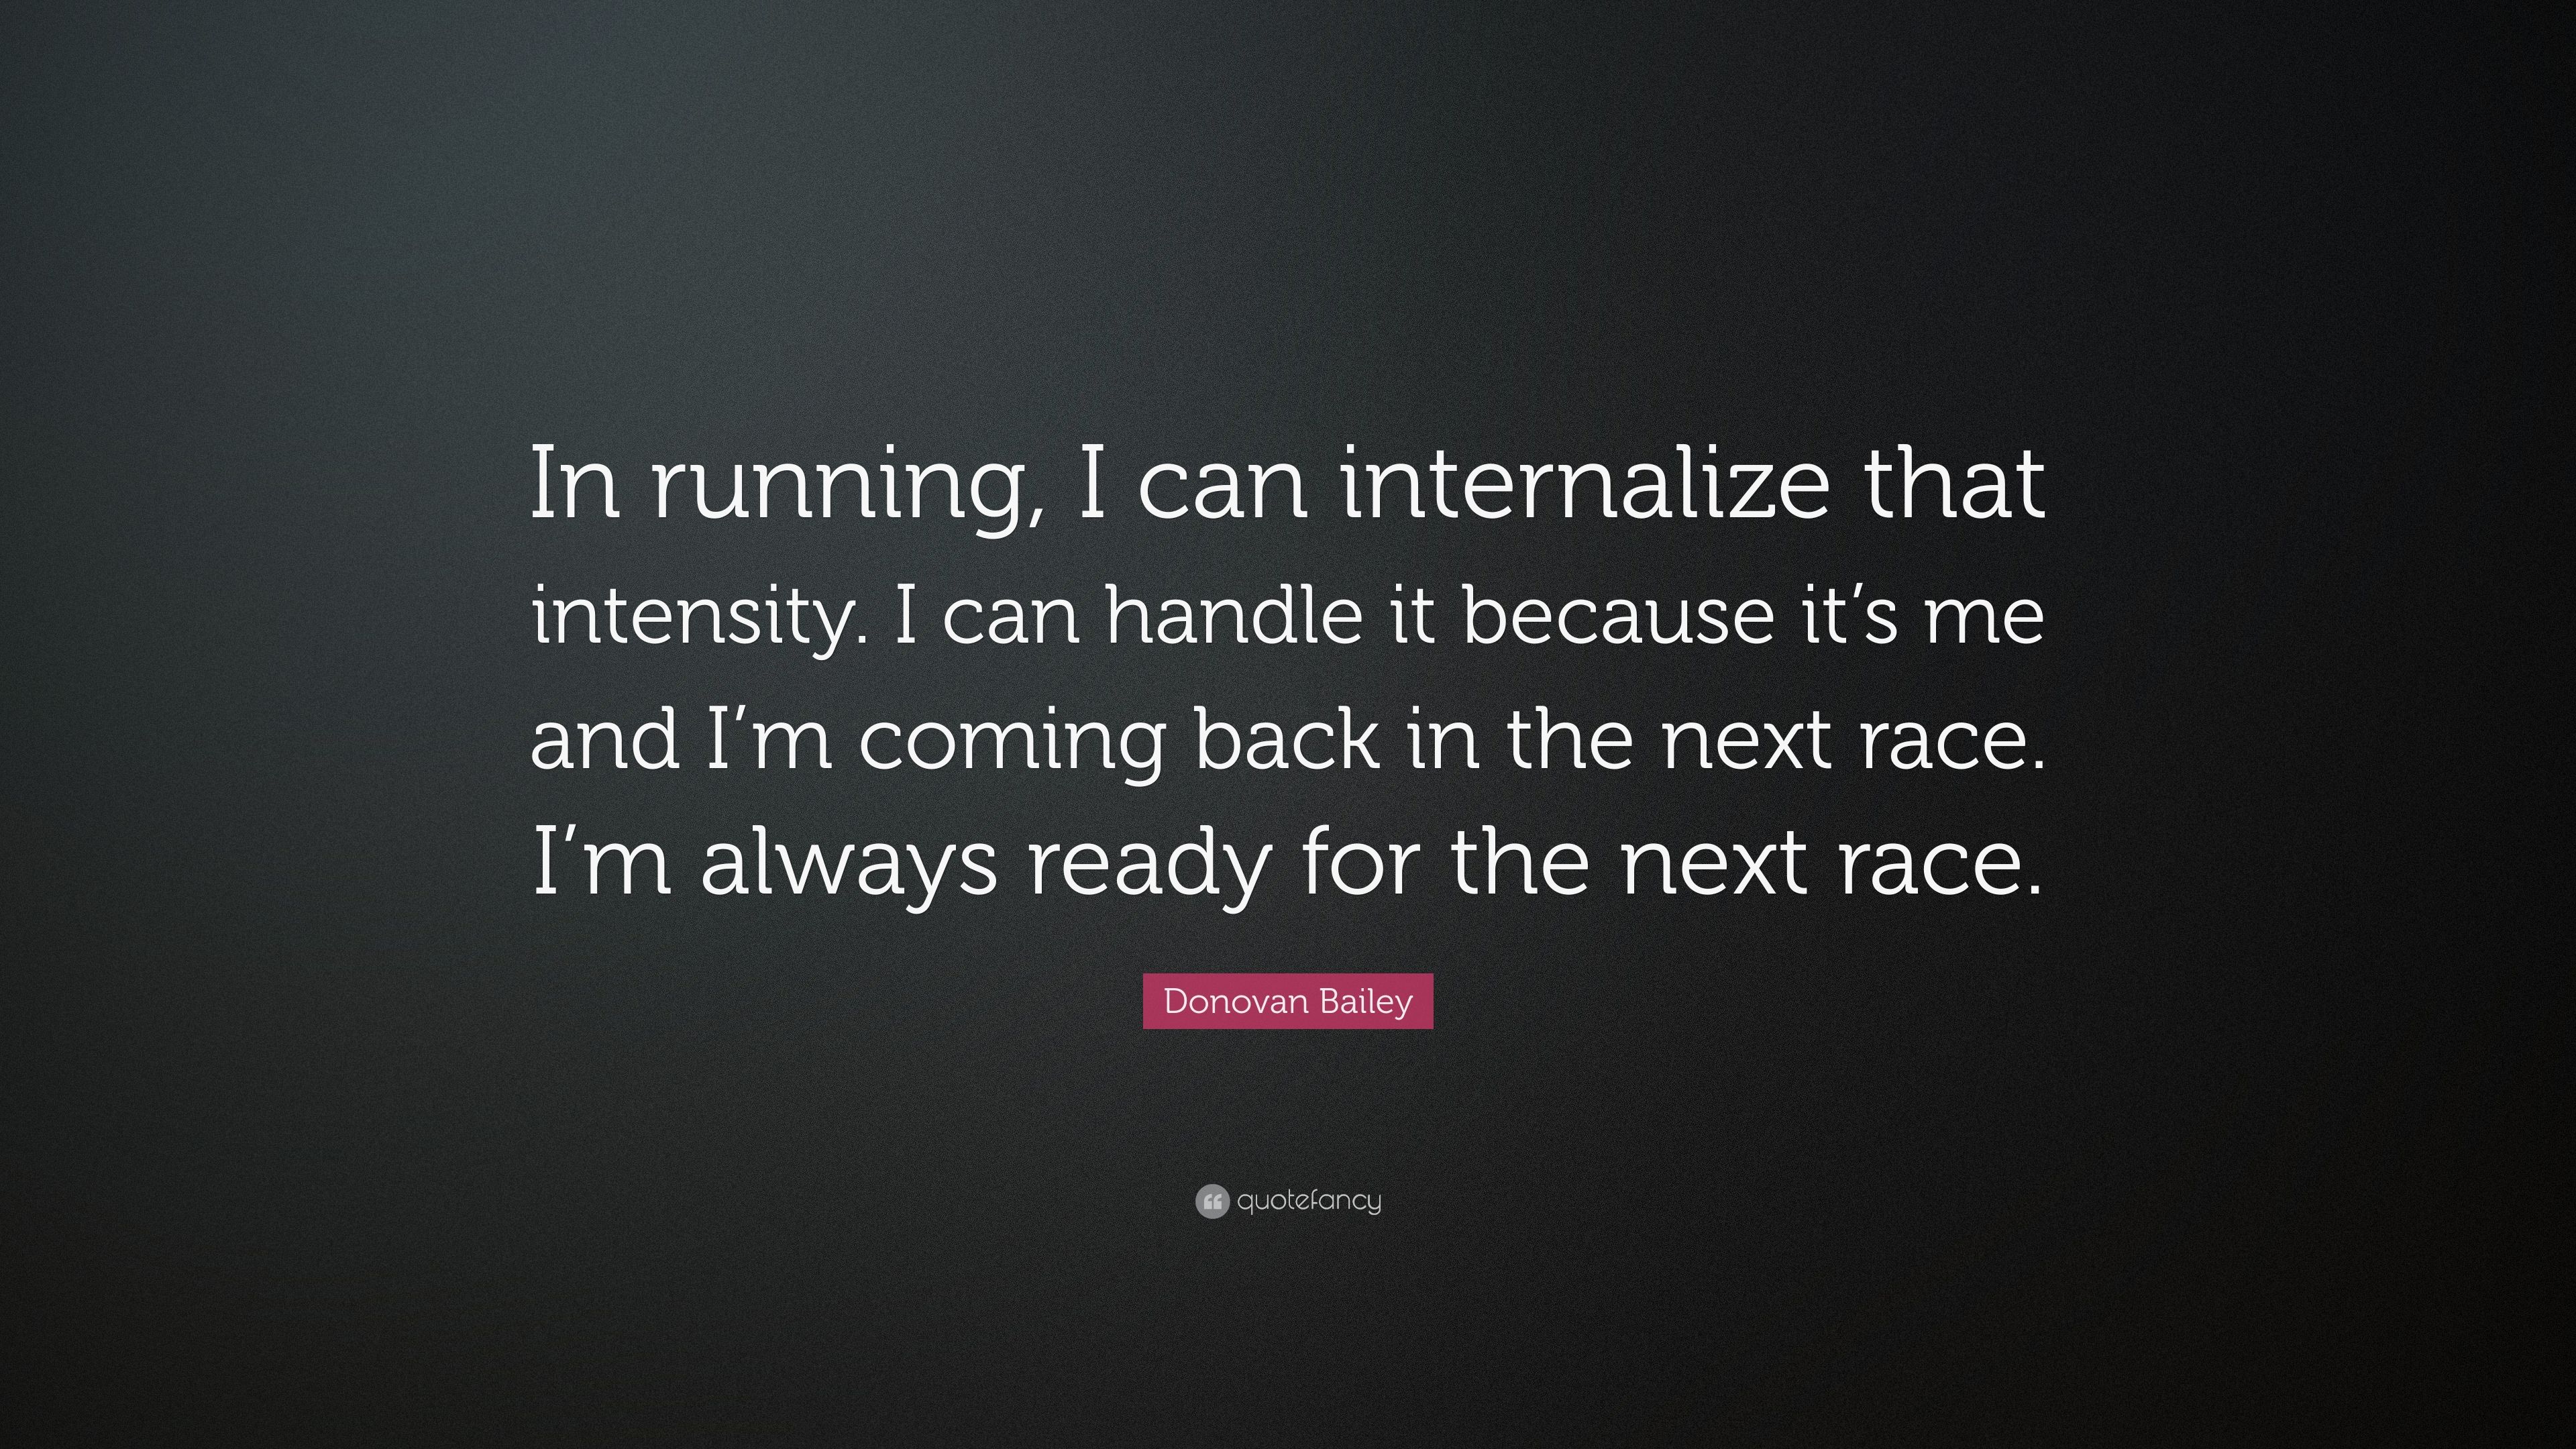 Donovan Bailey Quote: “In running, I can internalize that intensity